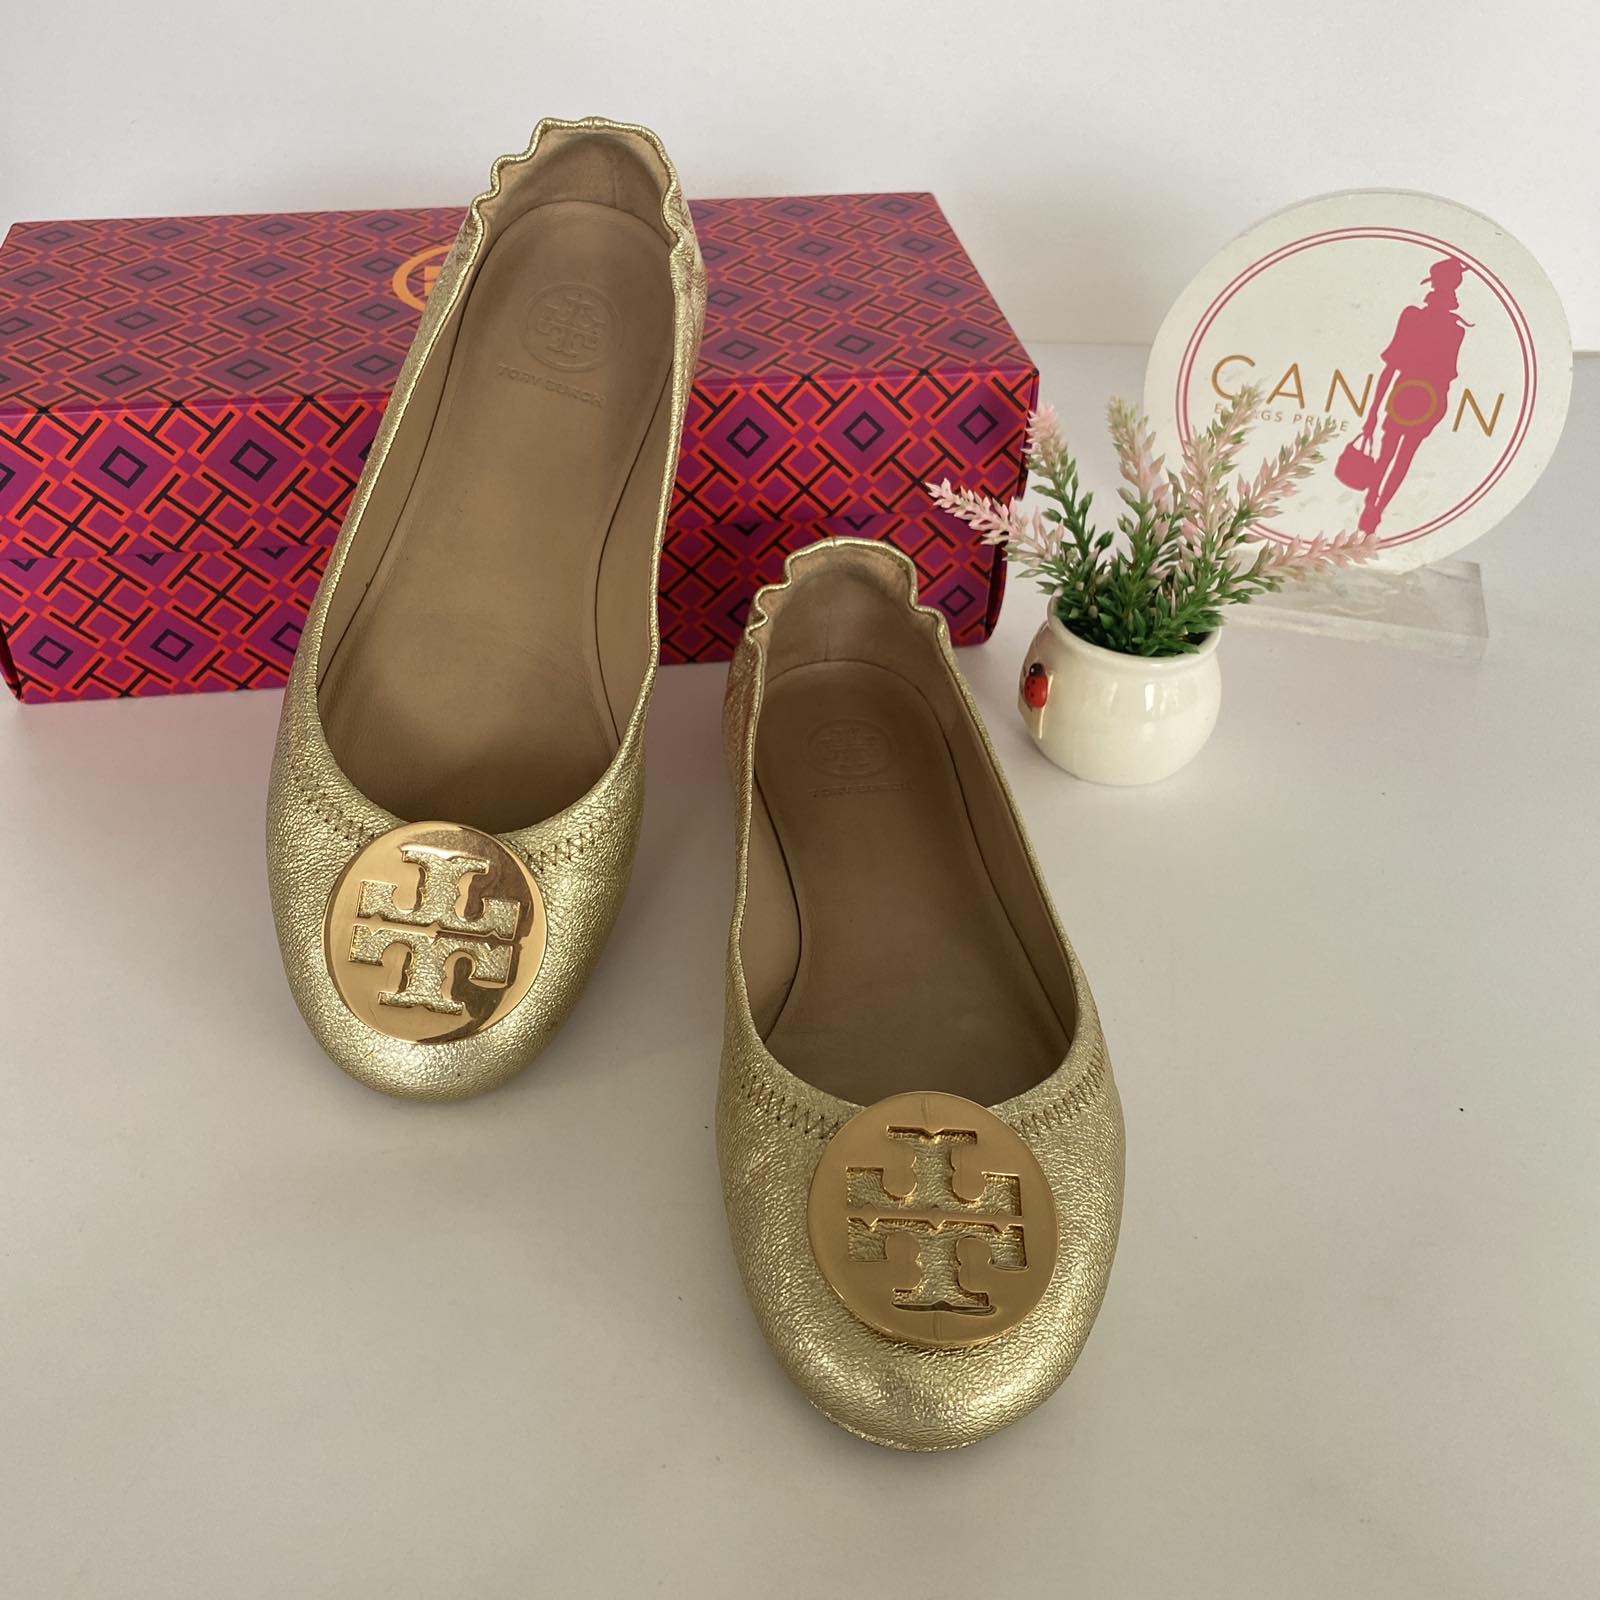 SOLD/LAYAWAY💕 Tory Burch Minnie Travel Ballet Metallic Gold Flats Size Us  7 - Canon E-Bags Prime